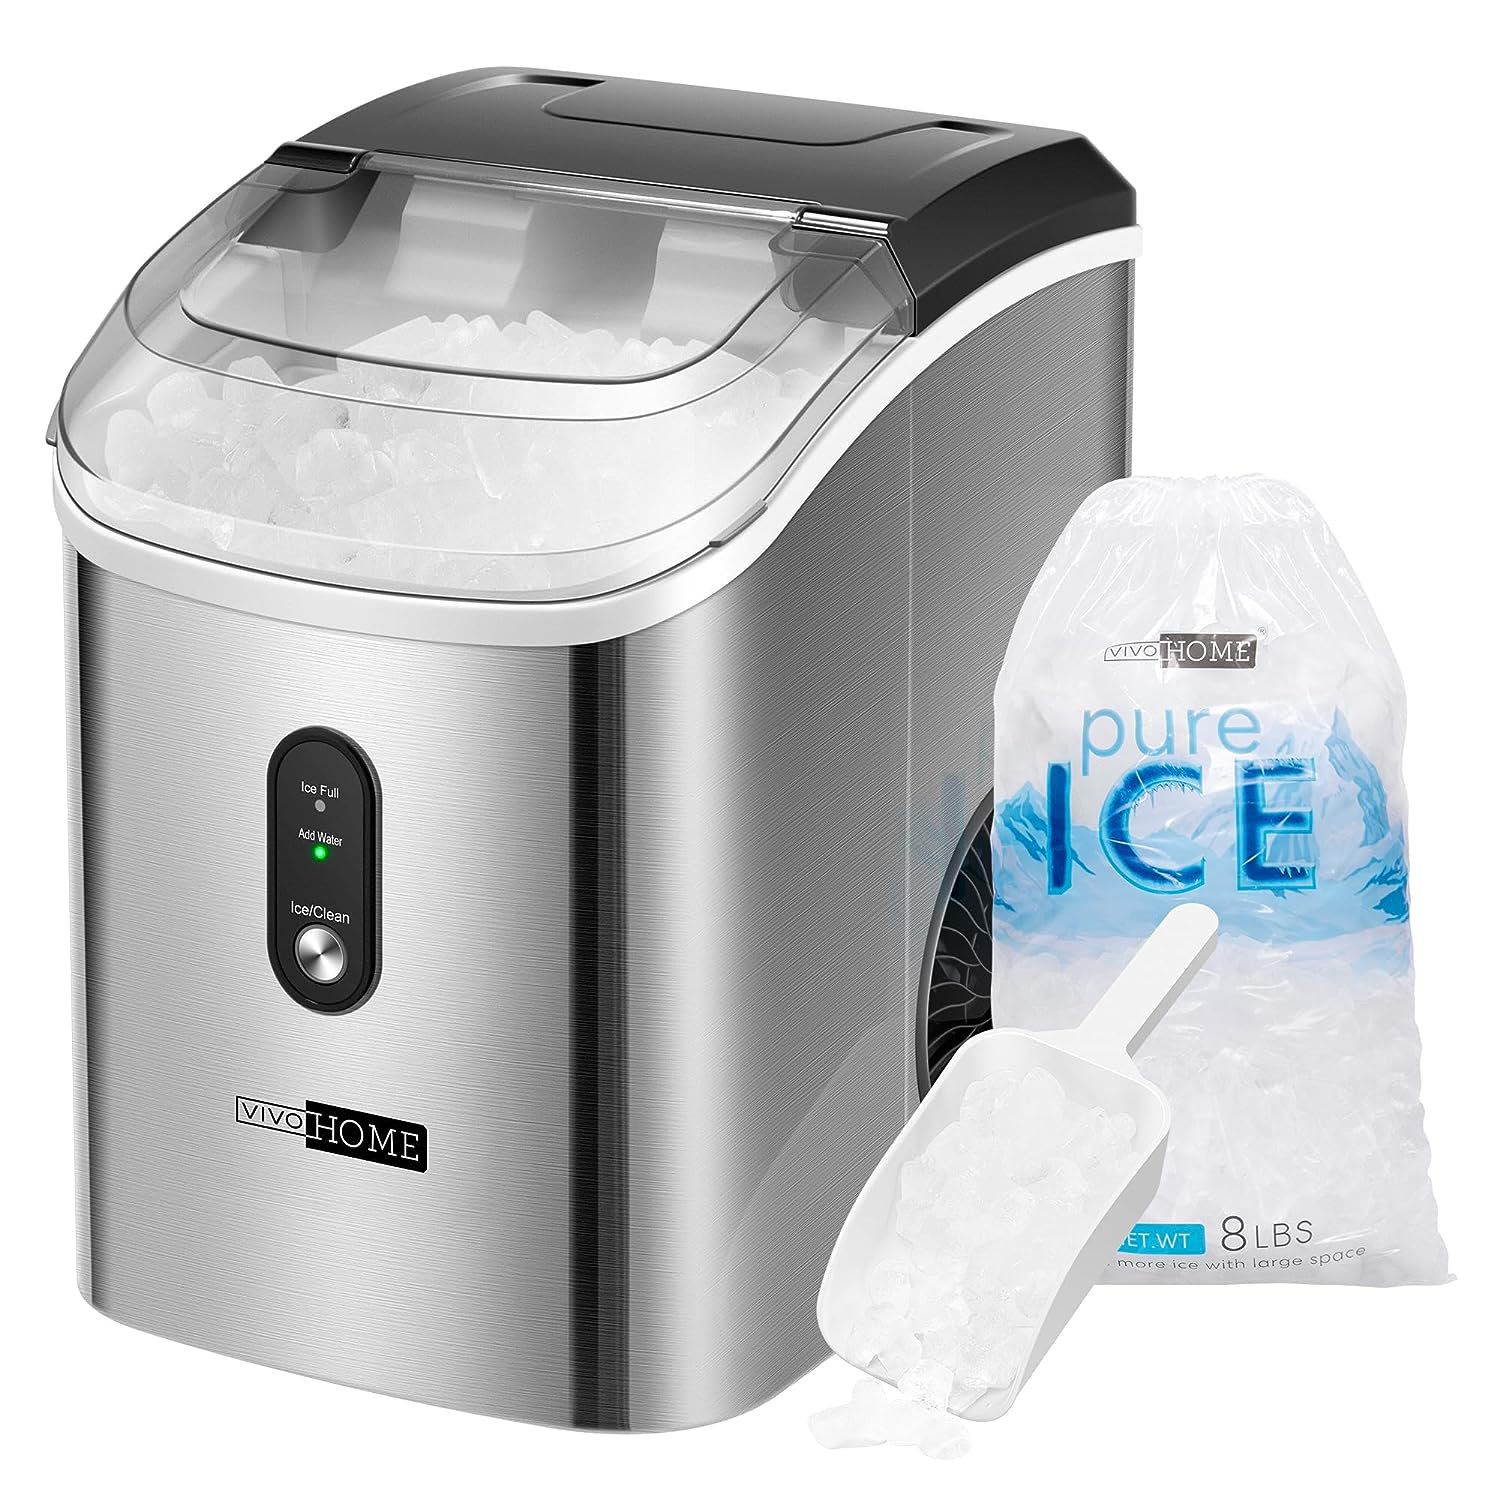 Greatest Countertop Ice Maker  HiCOZY Nugget Ice Maker 55 lbs Of